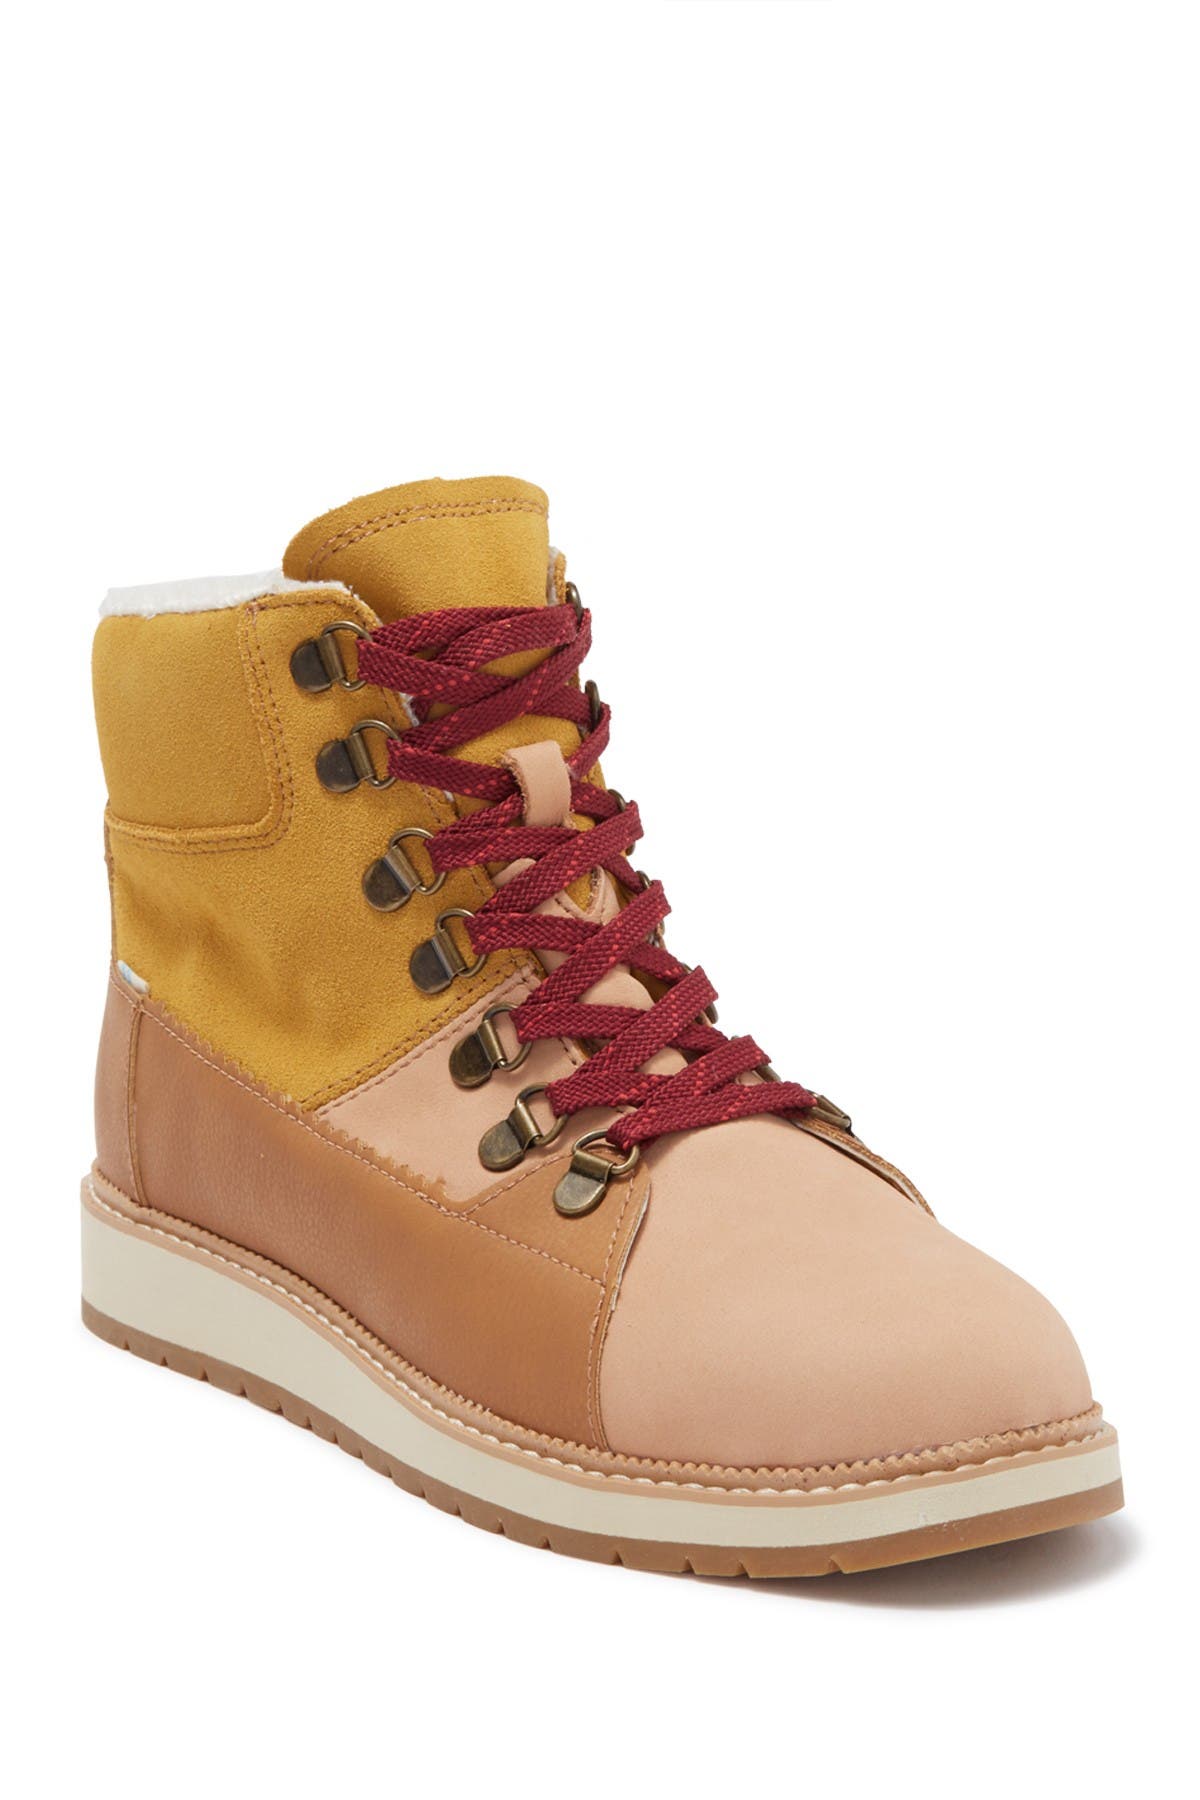 toms lace up boots